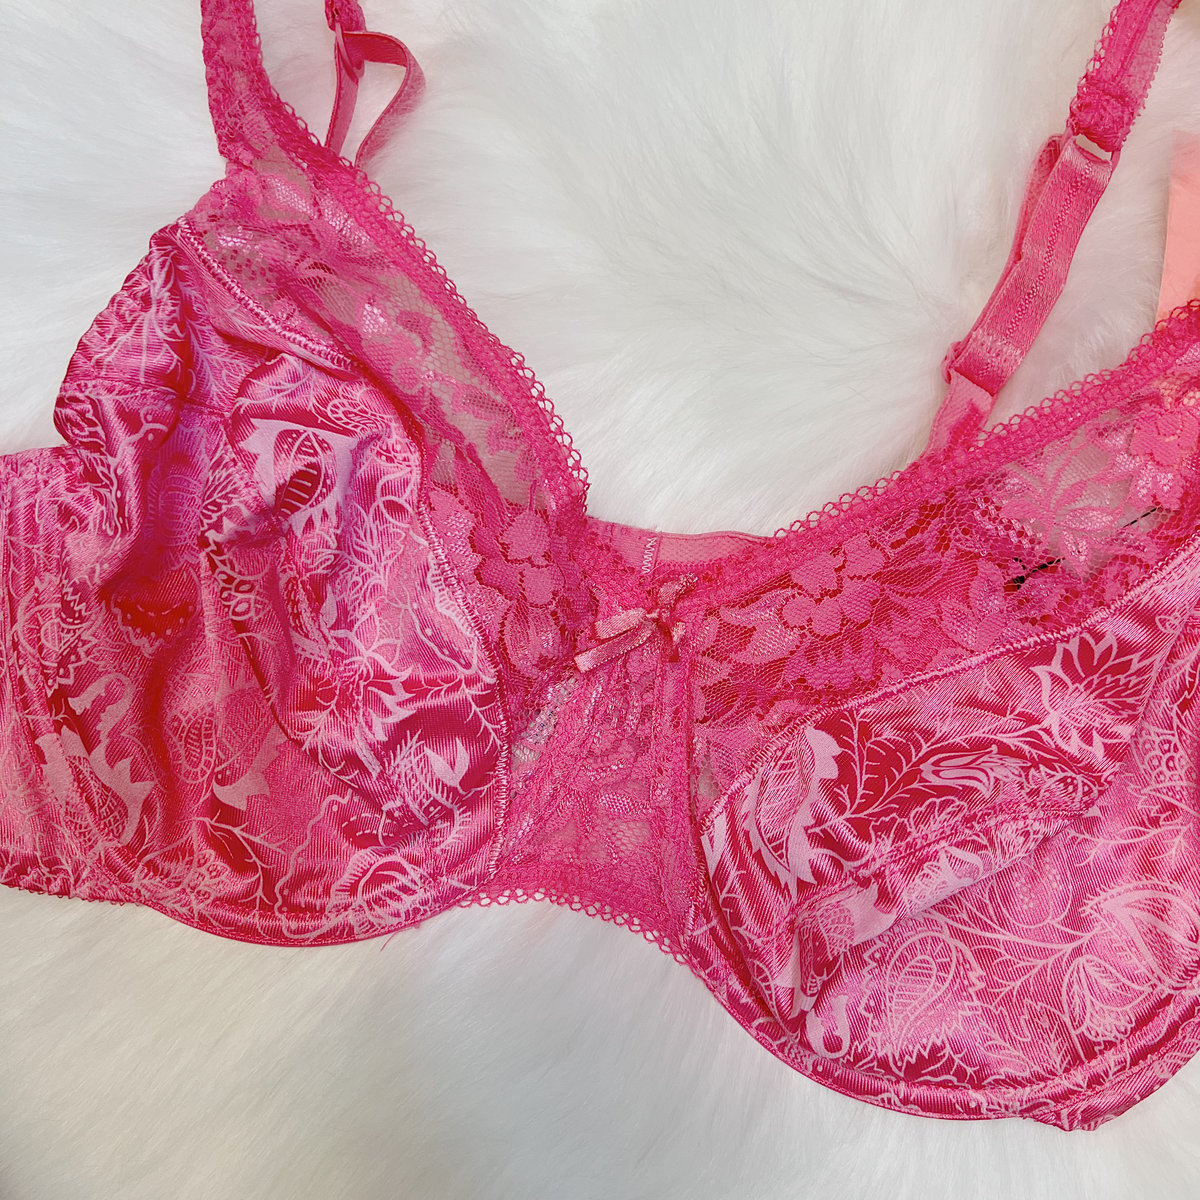 Buy DD+ Pink Lace Detail Bra Online in UAE from Matalan